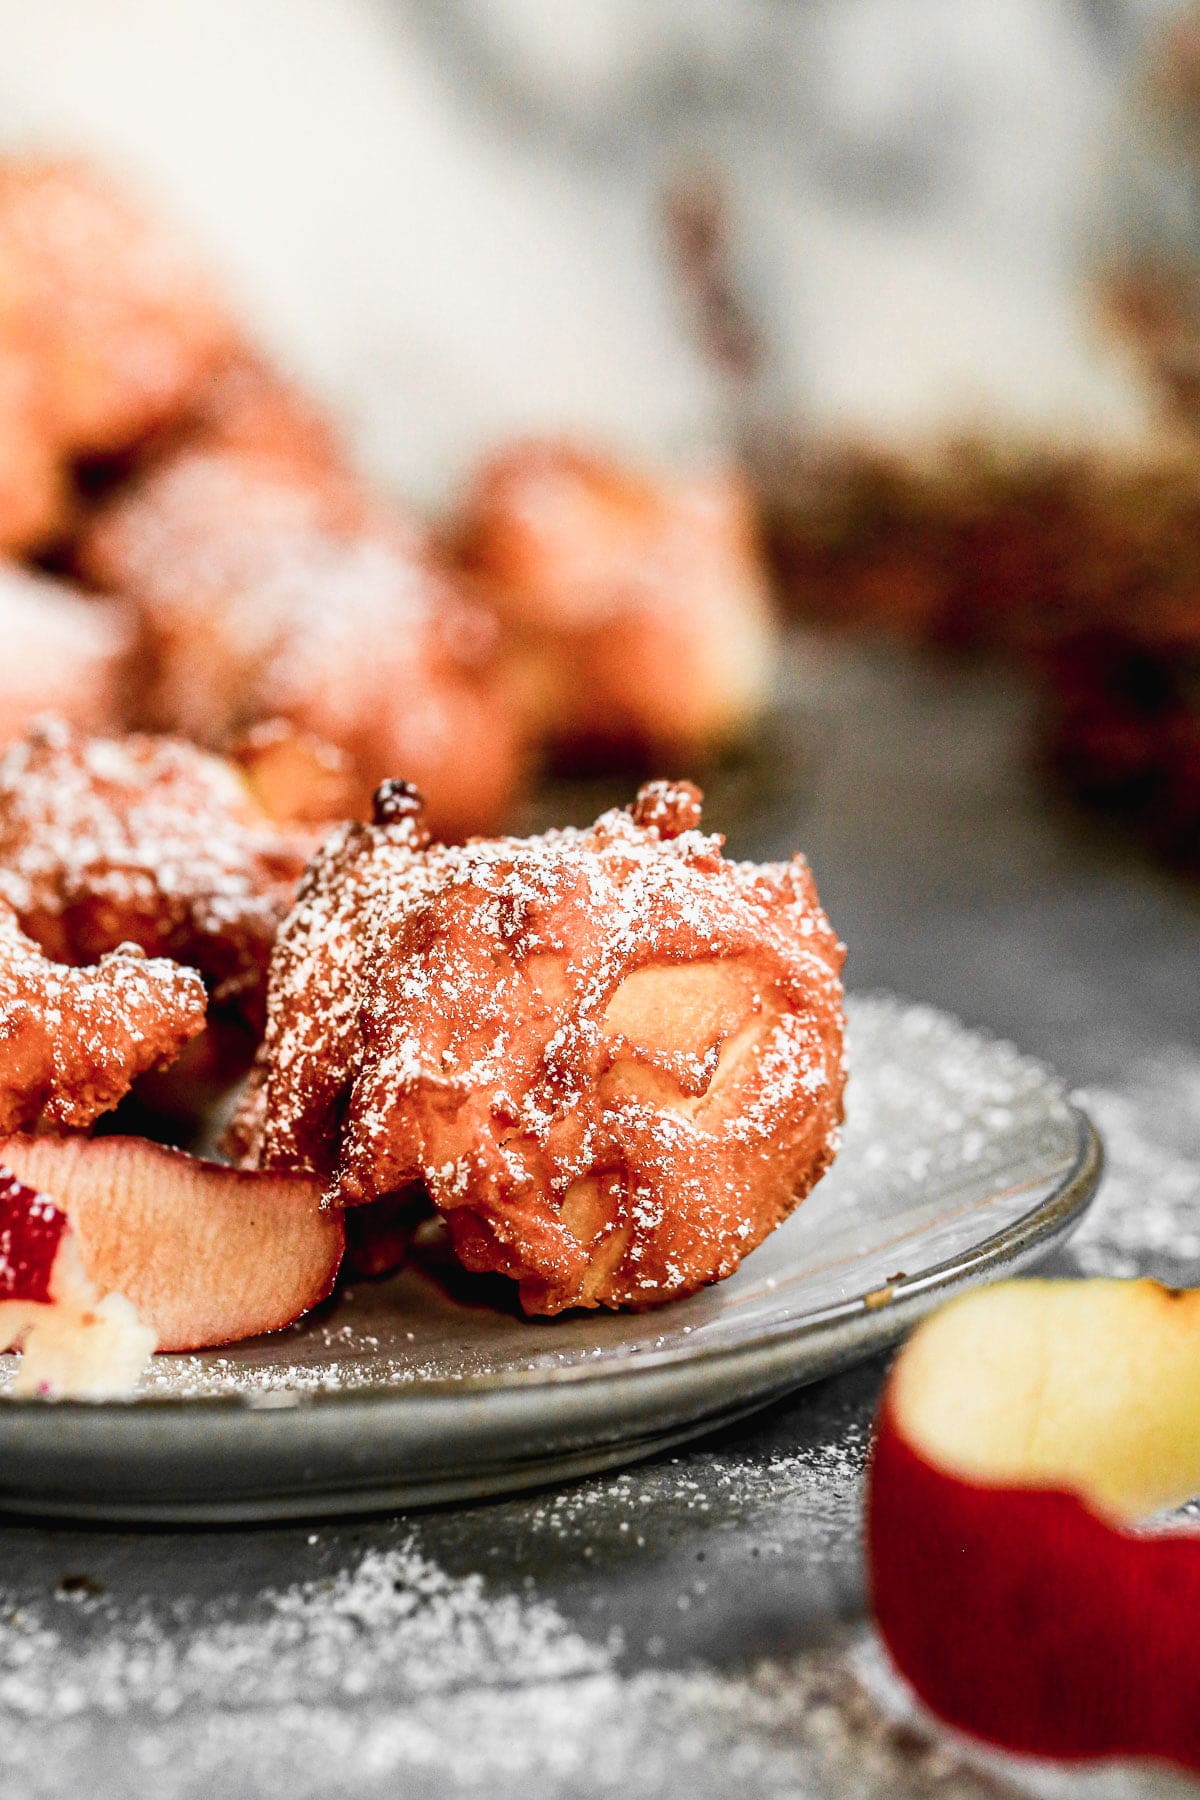 Crispy on the outside, tender and packed with apples on the inside and downright addictive, this Apple Fritter Recipe is hands-down the hit of our fall dessert season. 